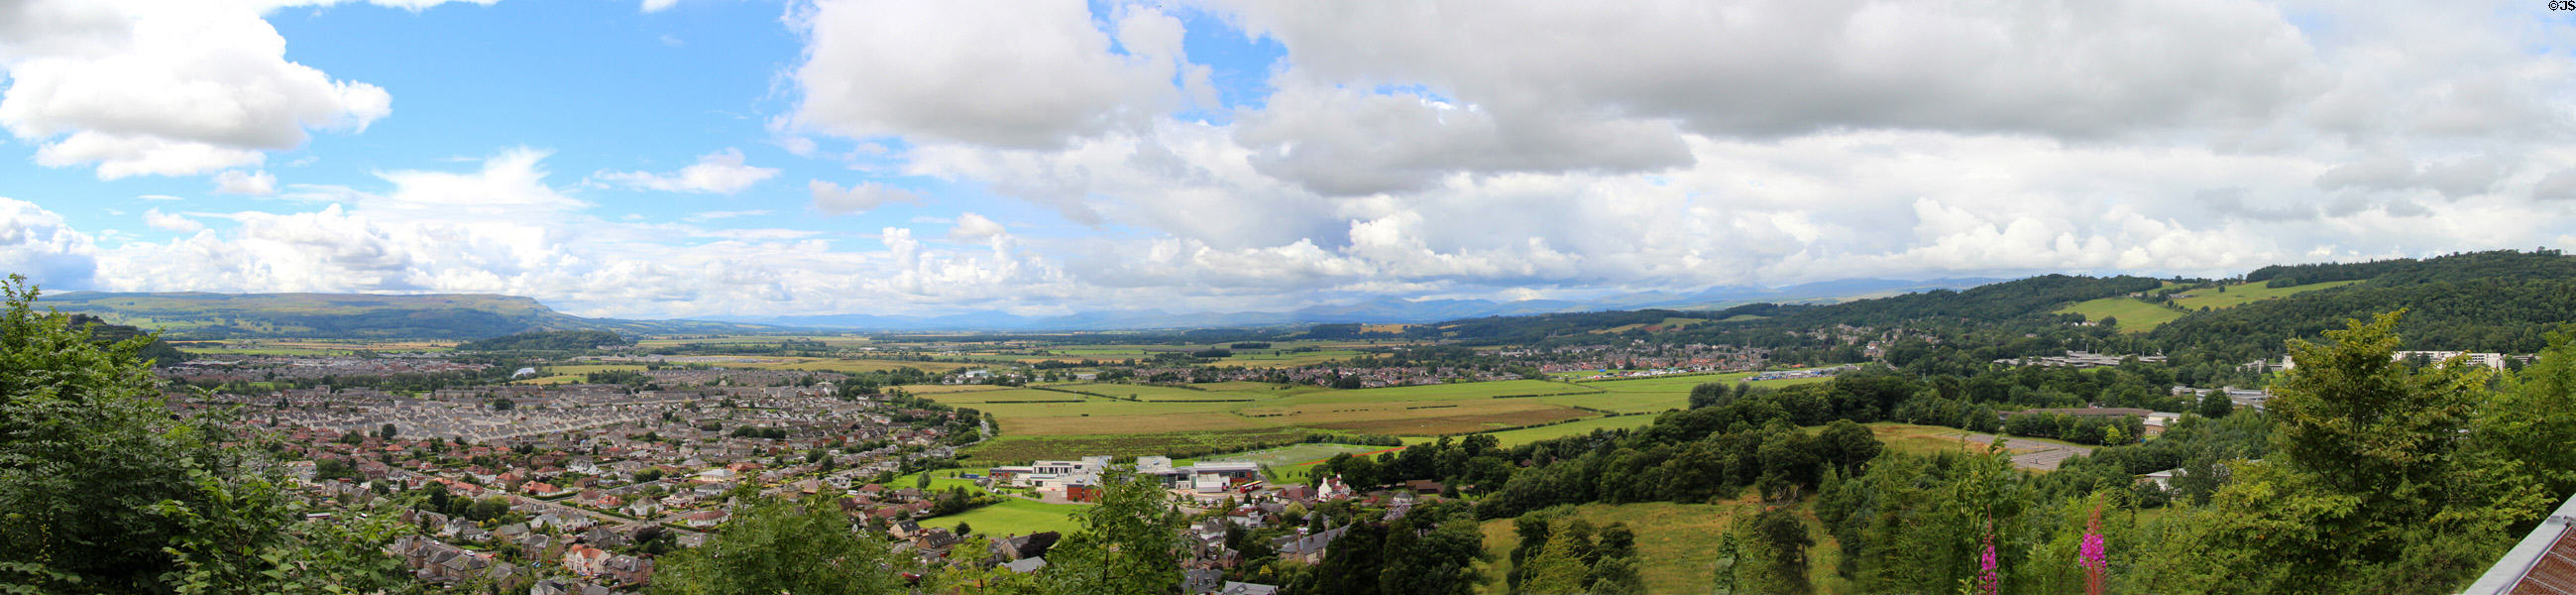 Panorama of Stirling & surrounding mountains seen from Wallace Monument. Stirling, Scotland.